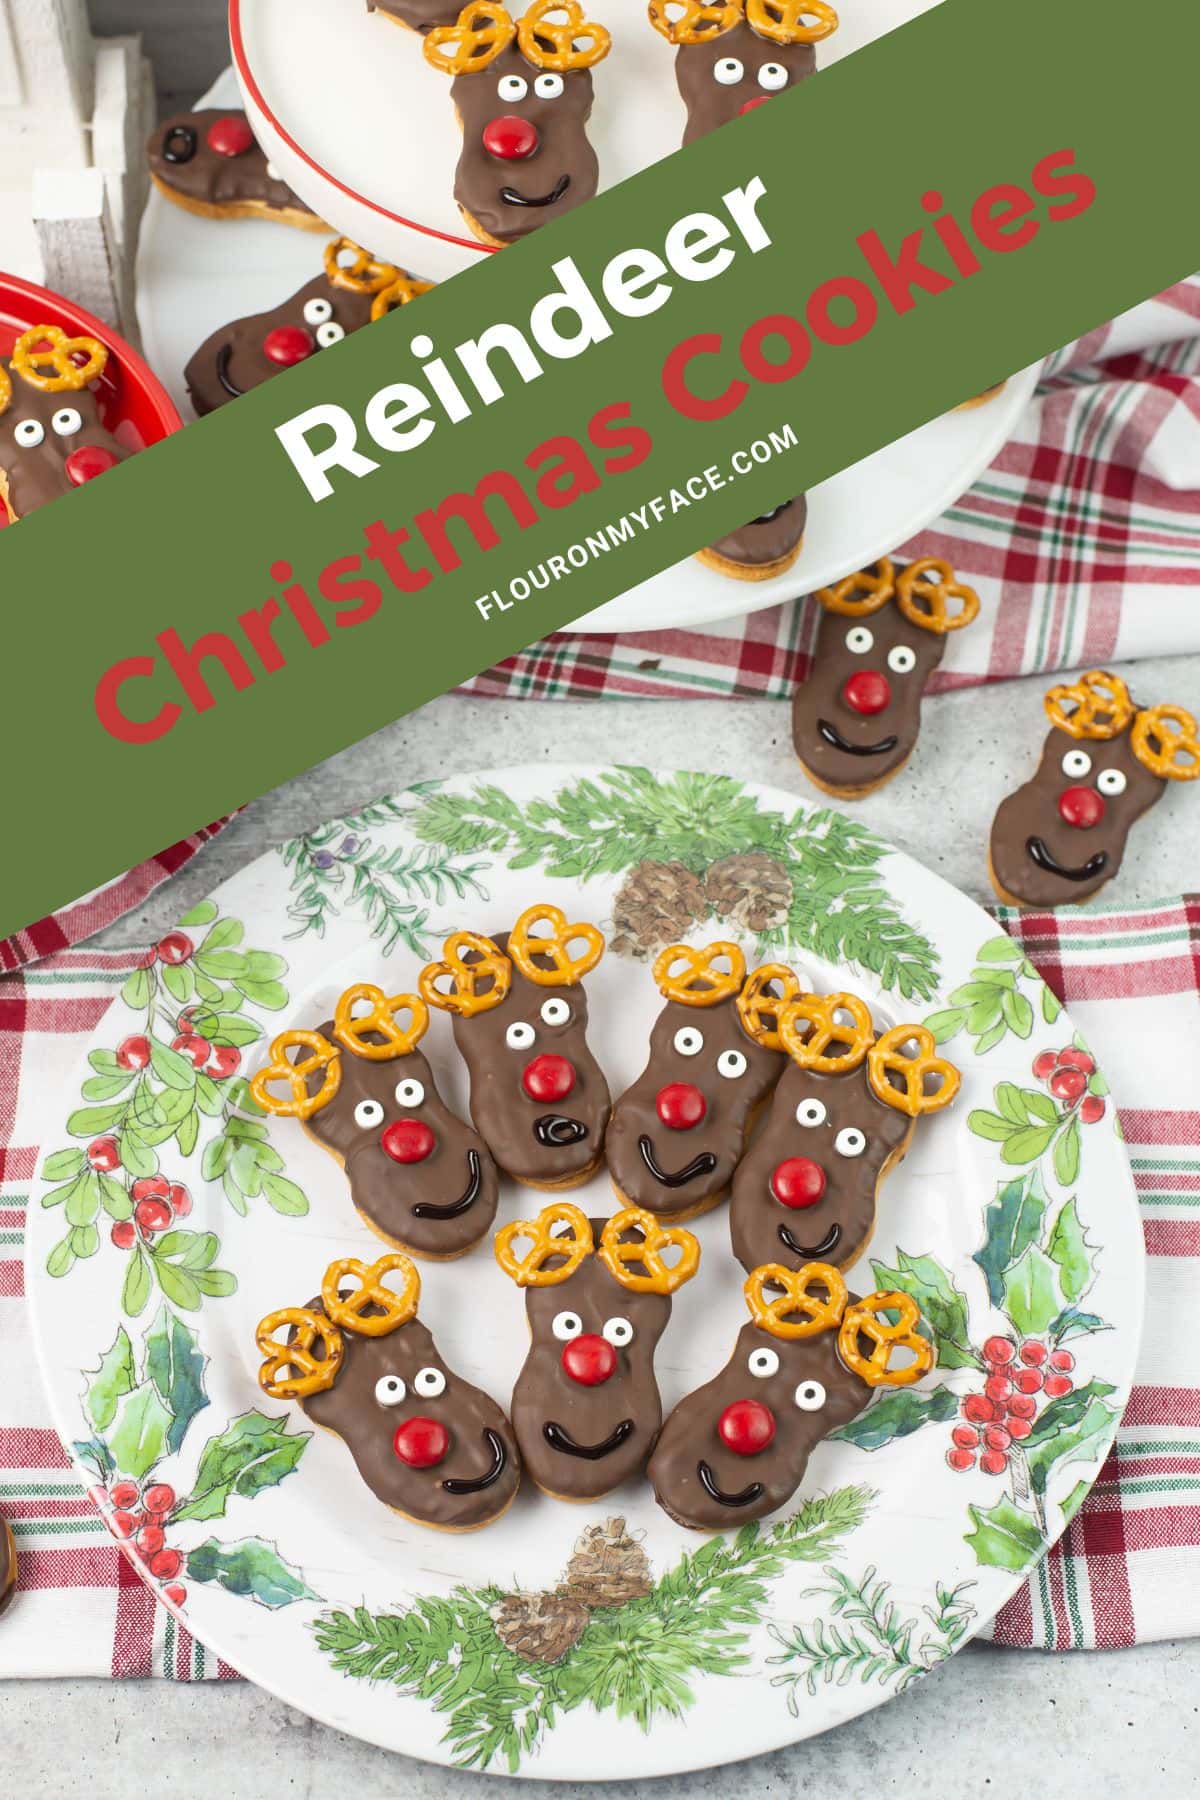 Vertical image featuring Reindeer Christmas cookies on a holiday plate.